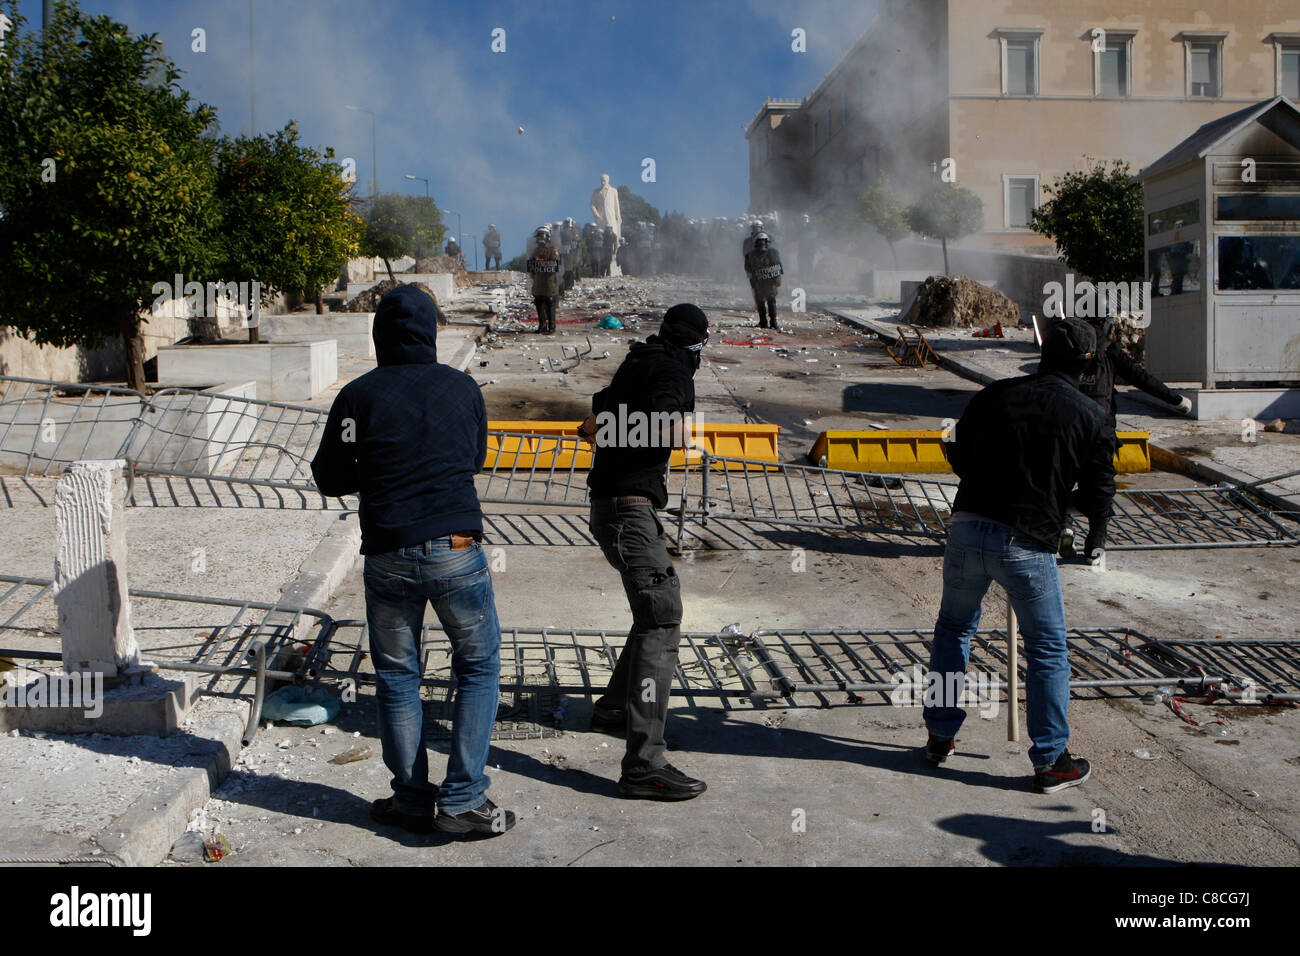 Athens Greece, 19/10/2011. Protesters clash with riot police, throwing fire bombs and stones. They were among thousands of people protesting in the Greek capital against proposed austerity measures. Stock Photo